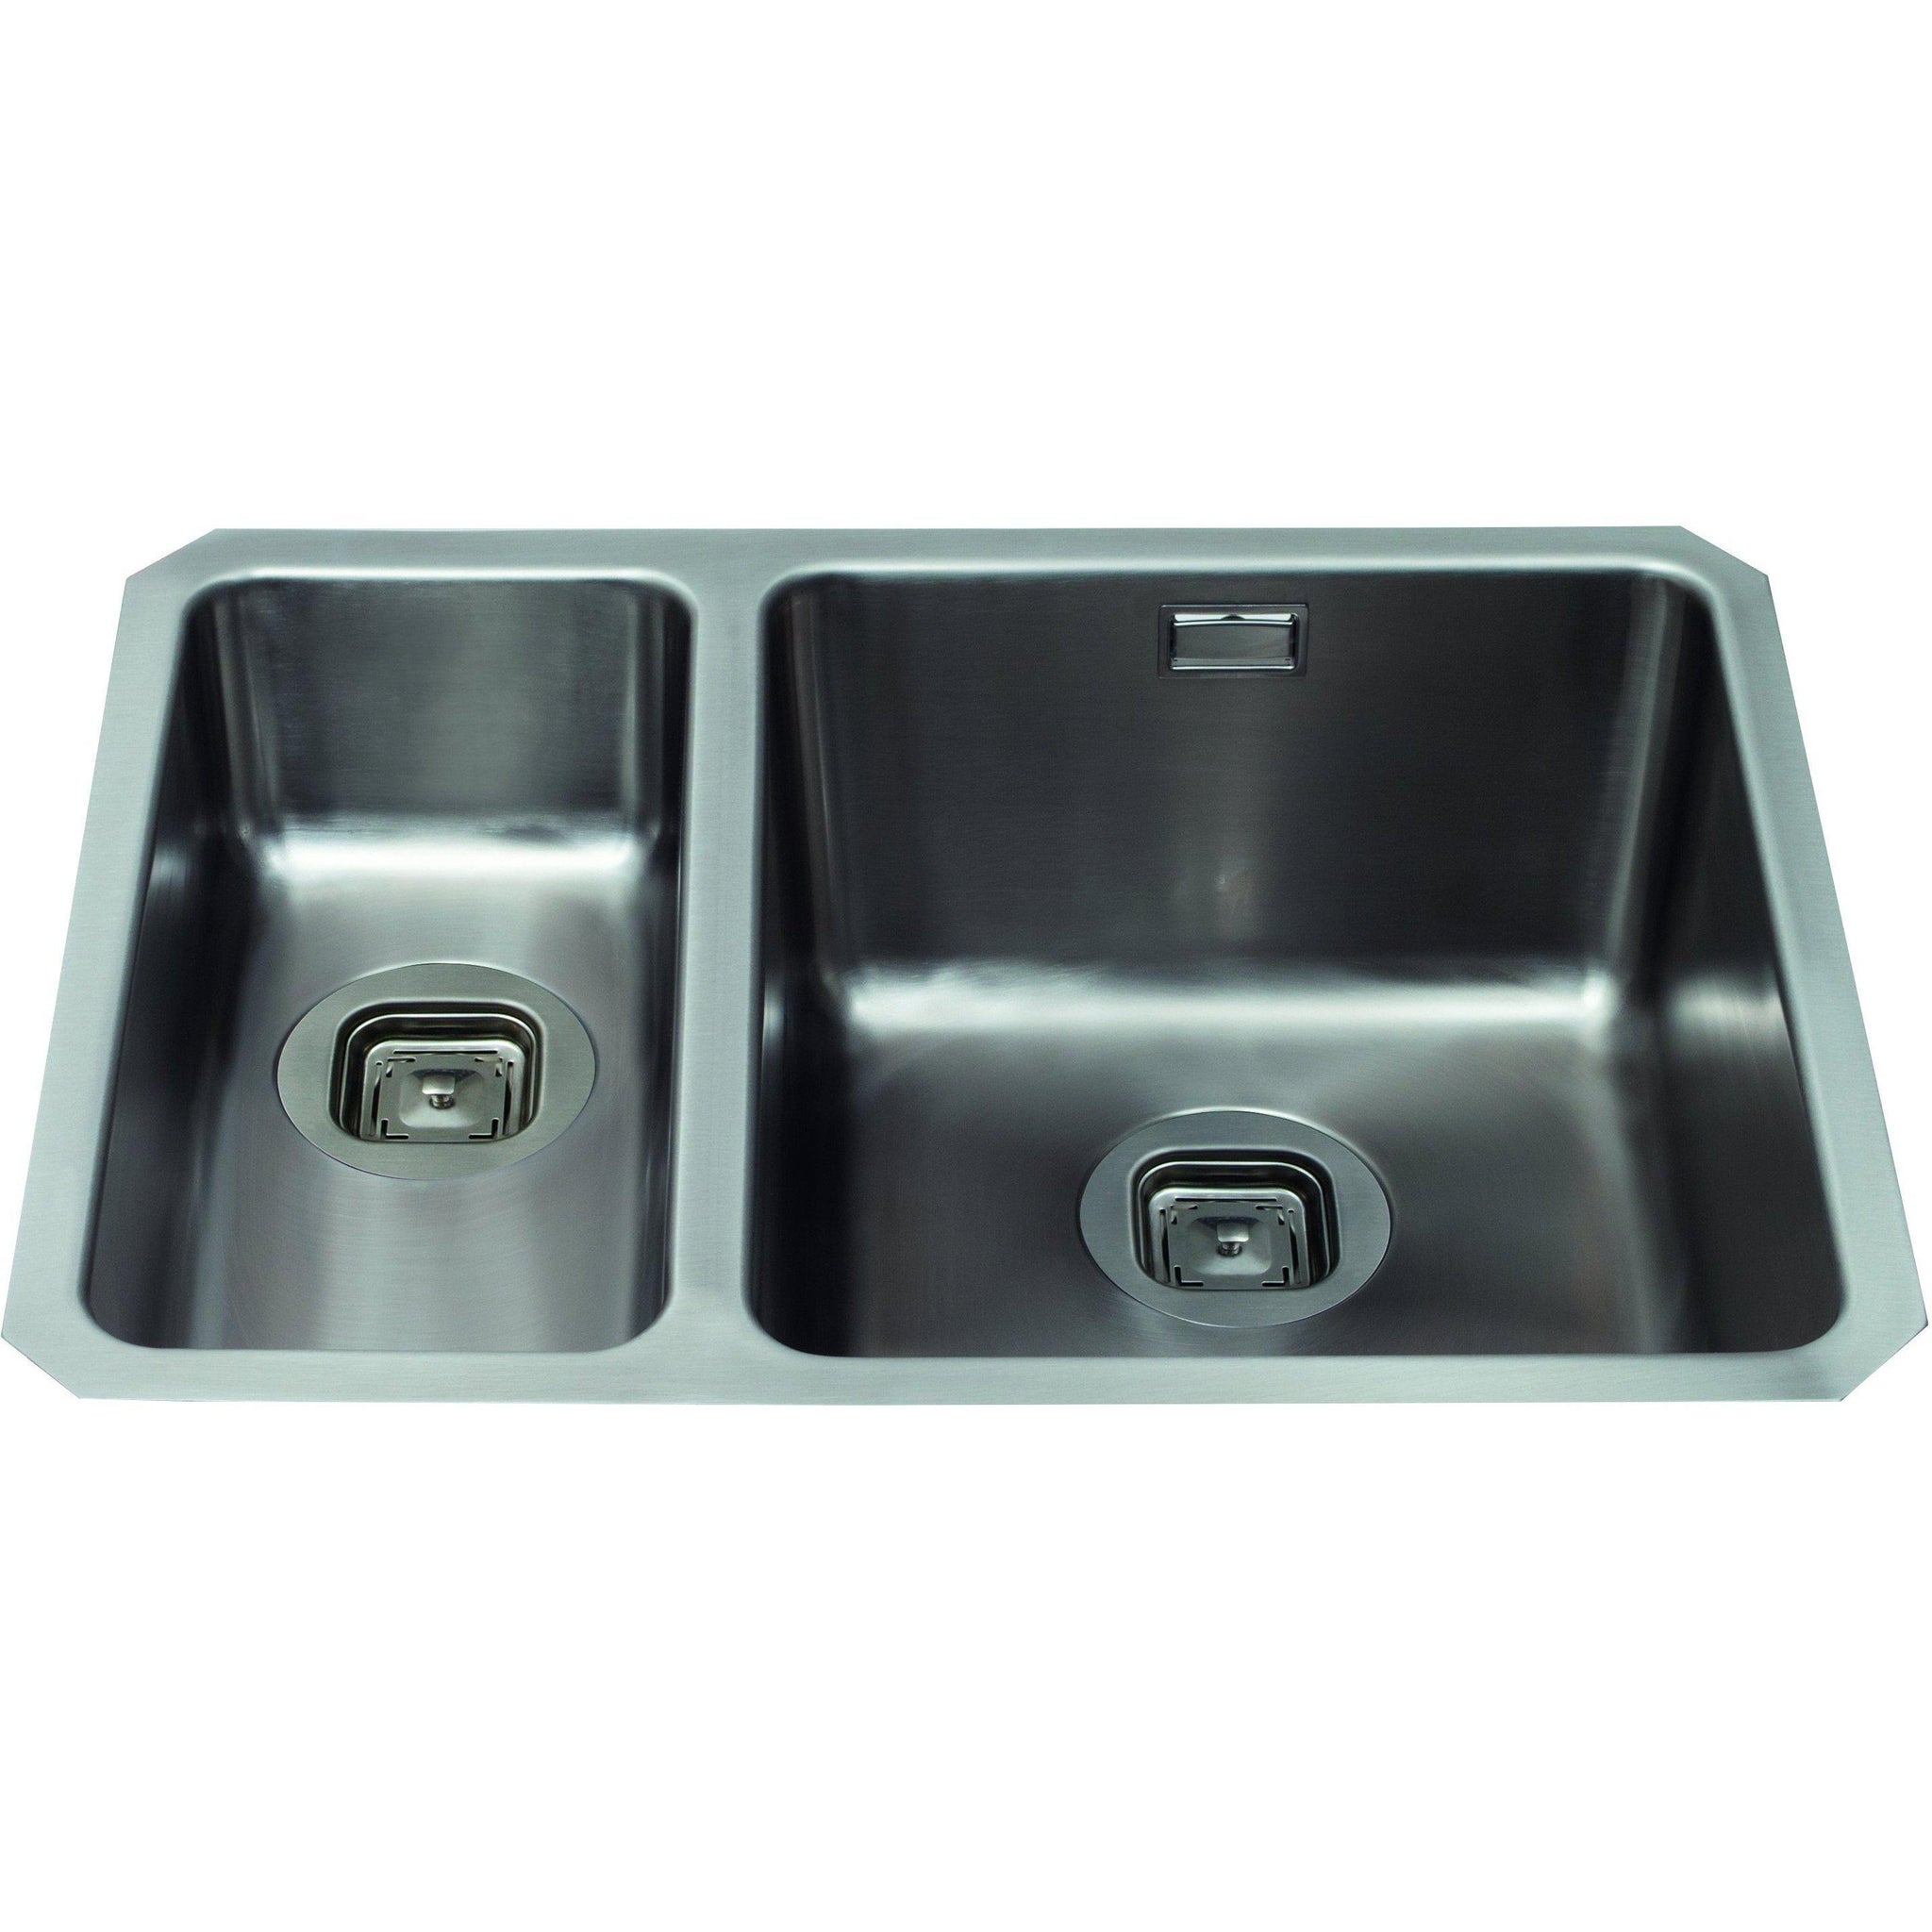 Cda Kvc35lss 15 Bowl Stainless Steel Undermount Small Bowl On Left Stainless Steel